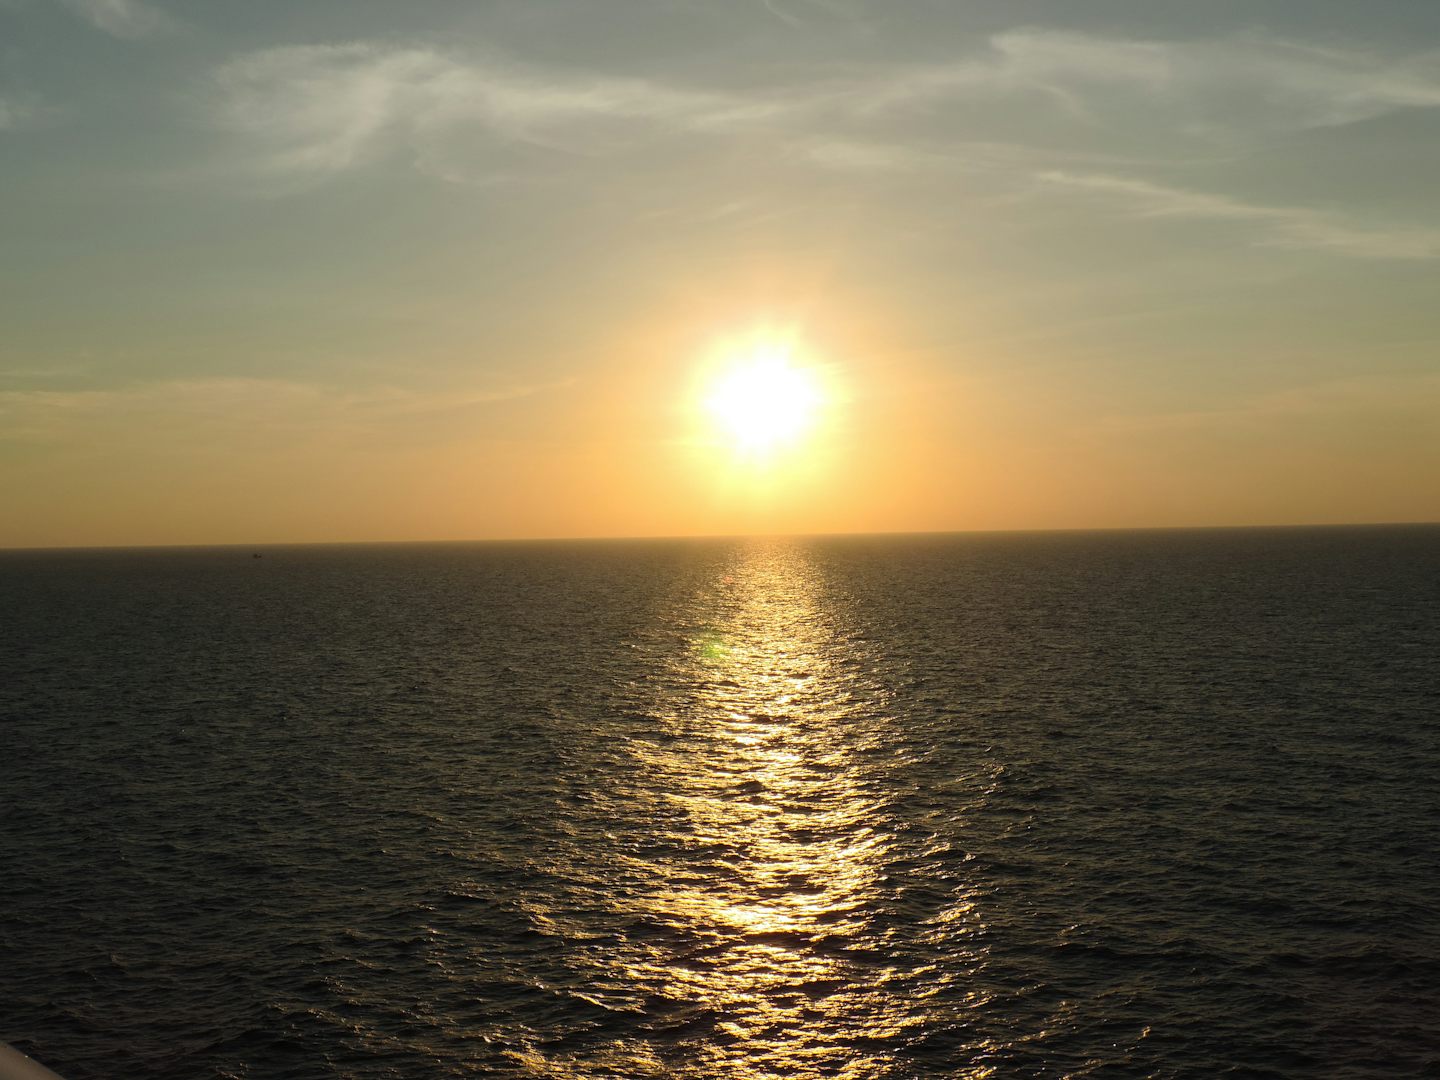 Sunset from The Sapphire Princess